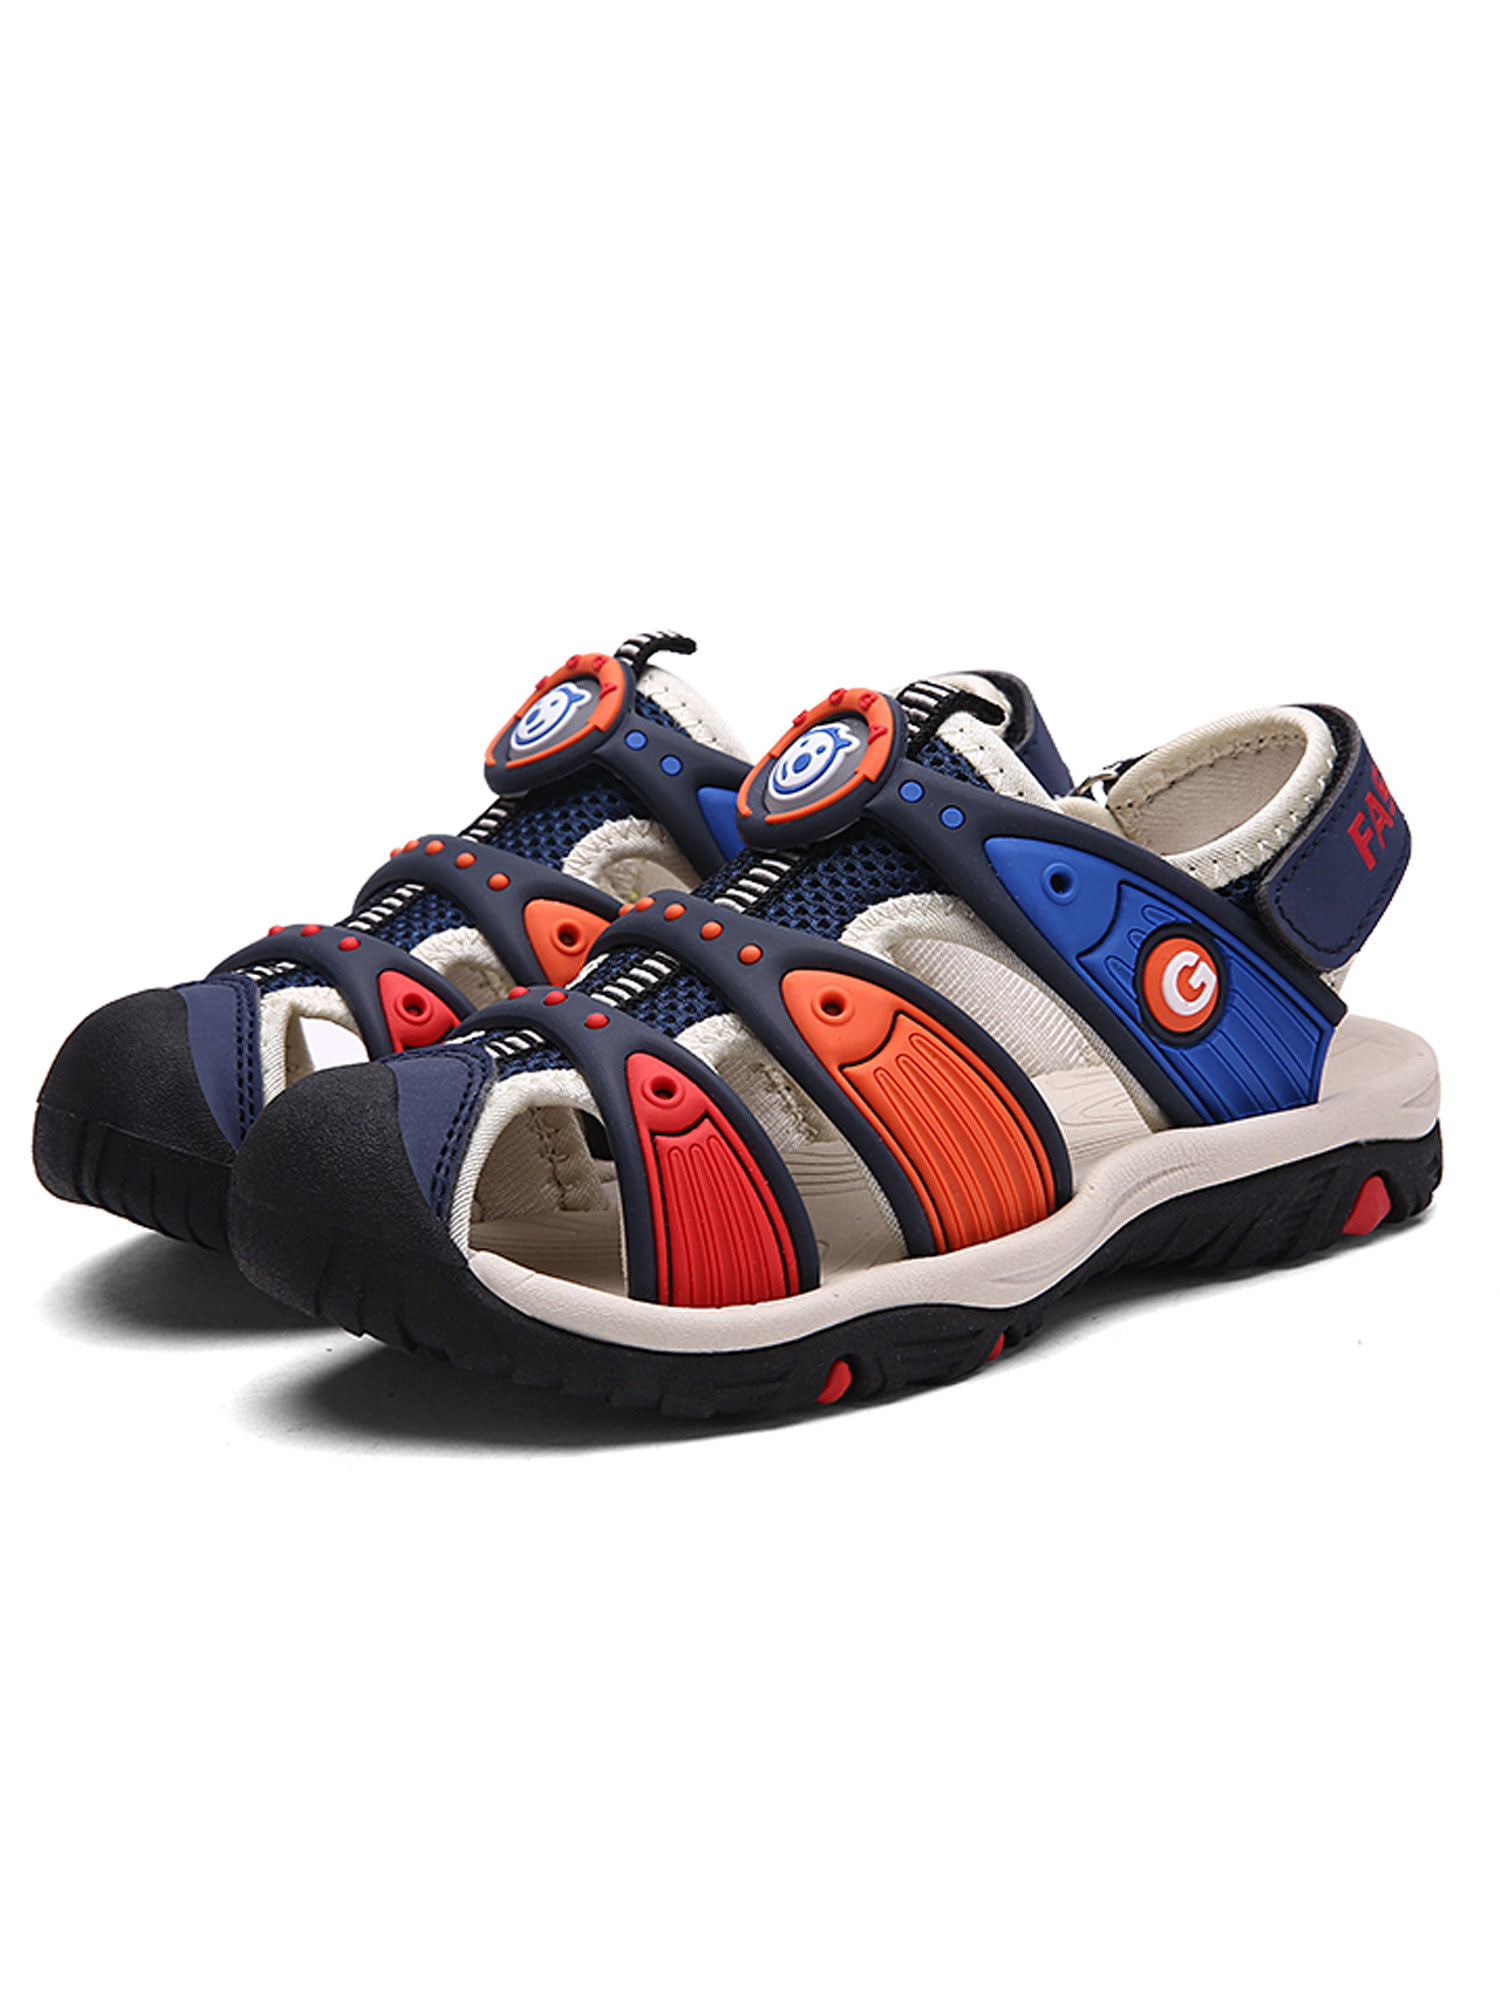 Toddler/Little Kid/Big Kid DADAWEN Summer Beach Outdoor Closed-Toe Sandals for Boys and Girls